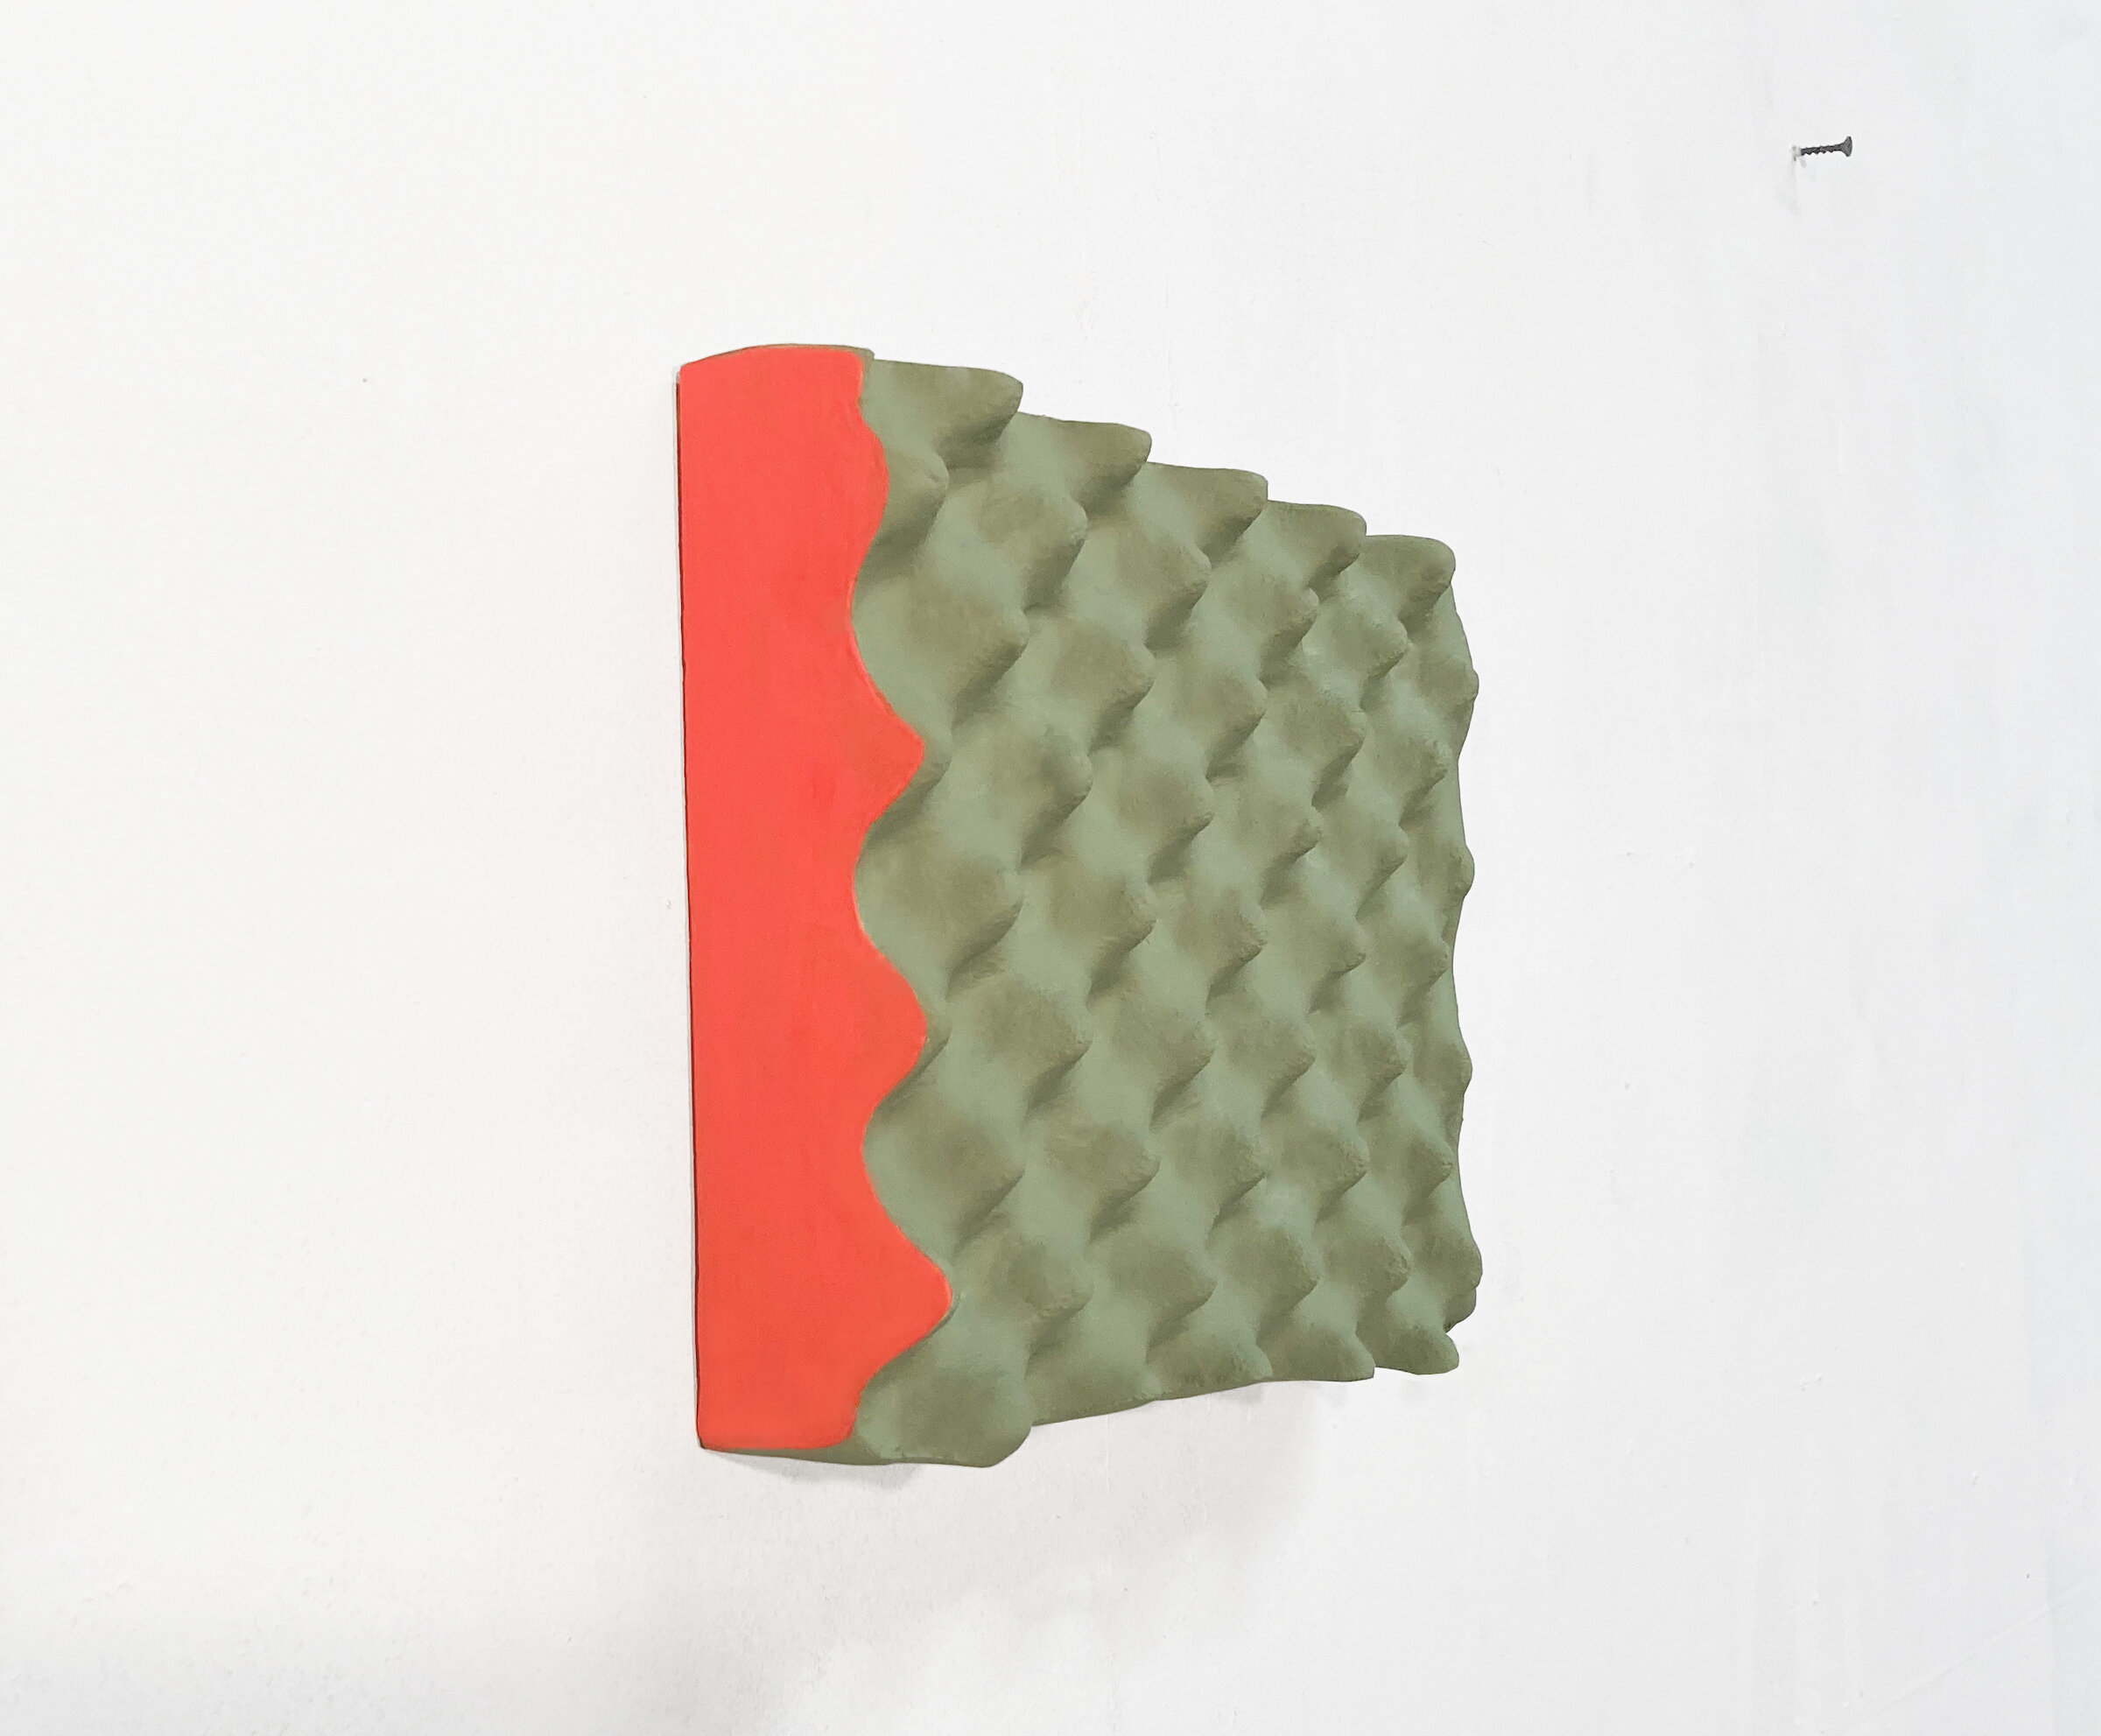   Giulia Piera Livi ,  Untitled (green with coral),  2020. Mixed media, foam, flashe (with screw), 8 x10 x2 in. 